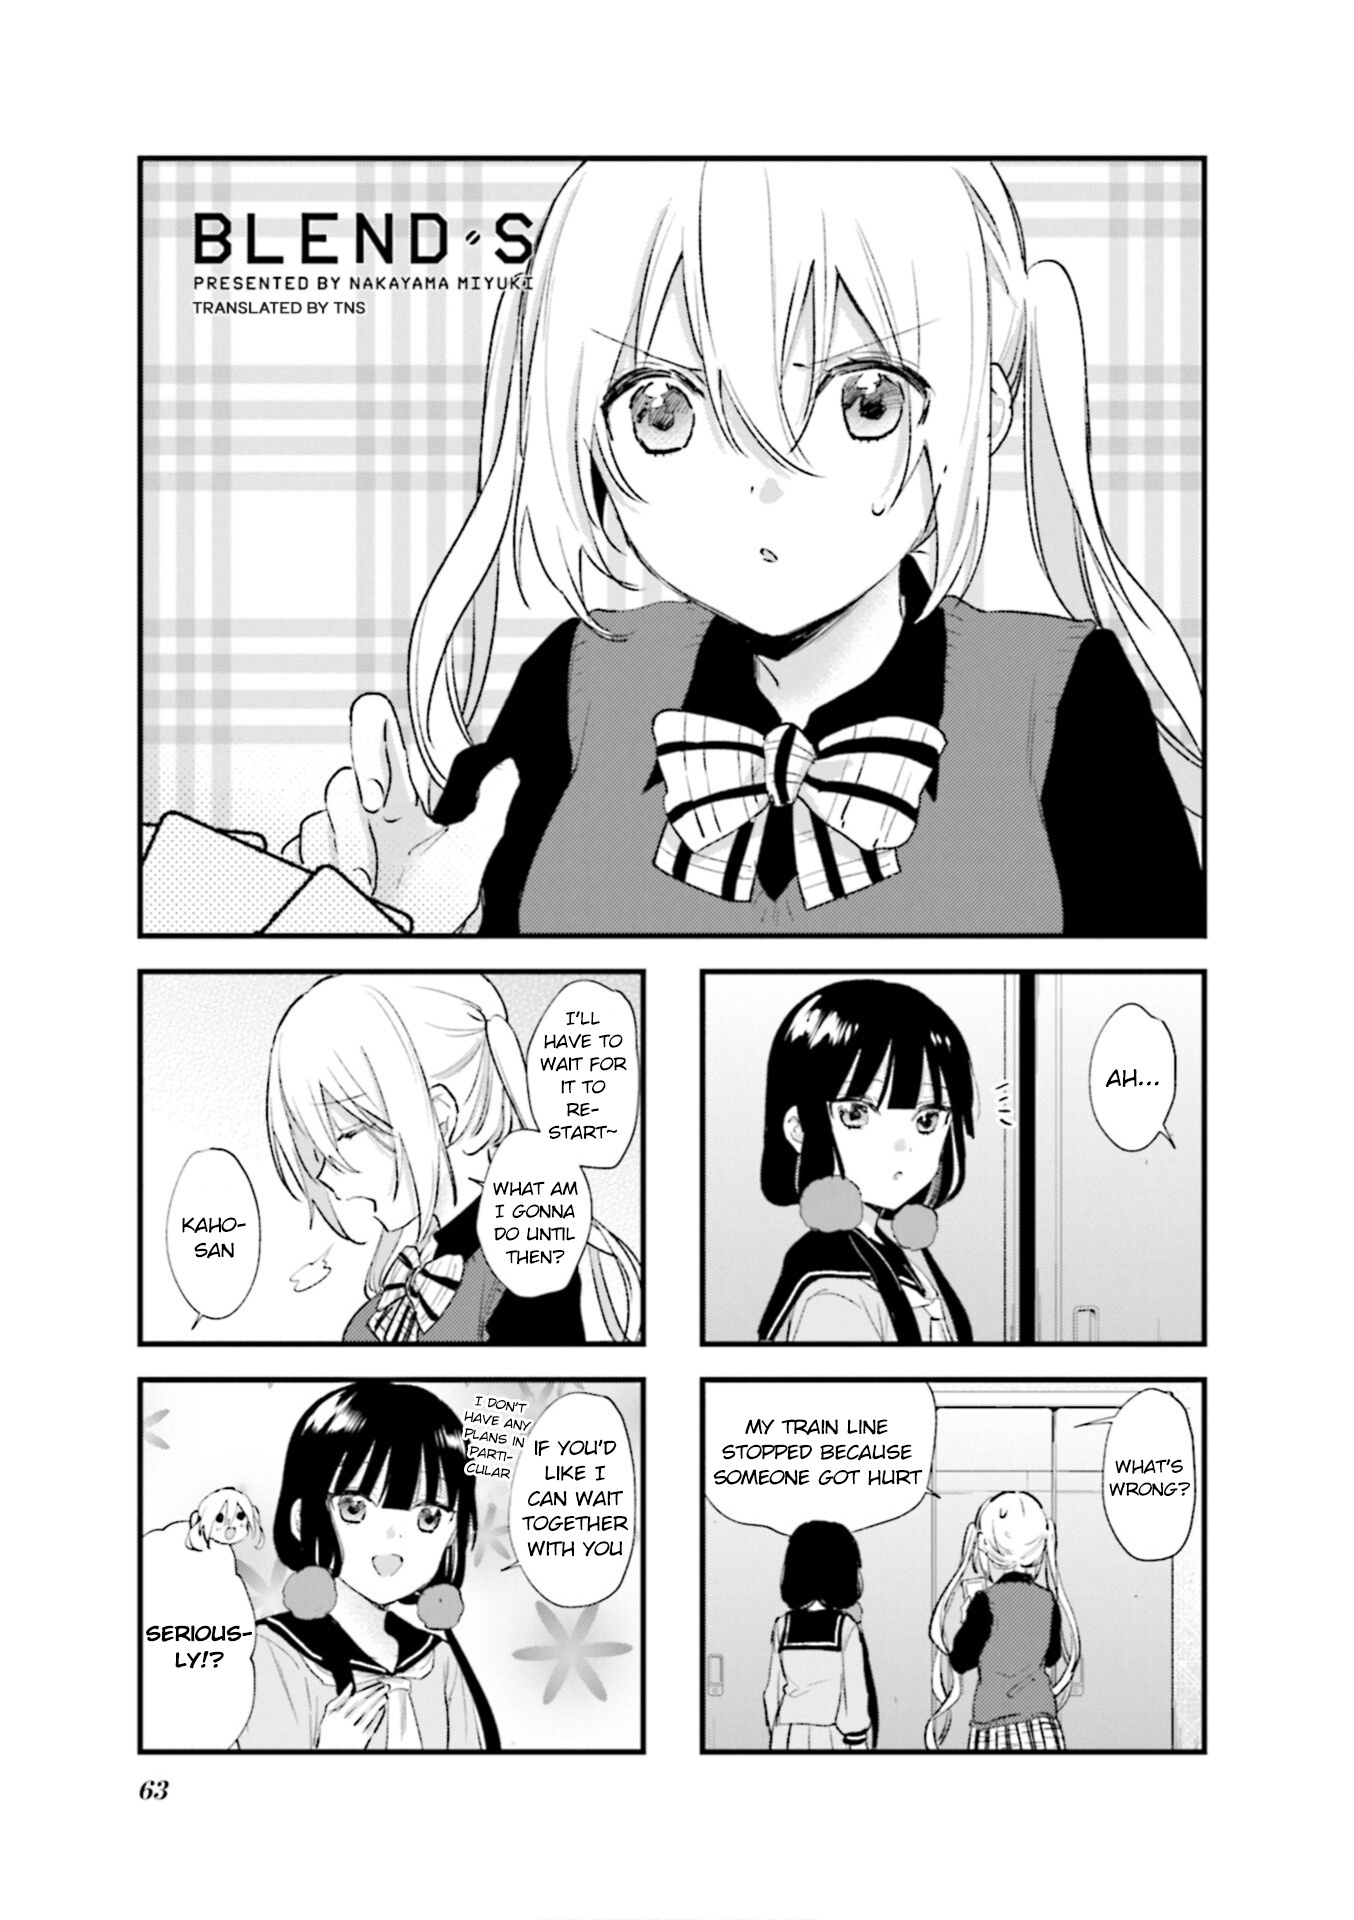 Blend-S - Page 1